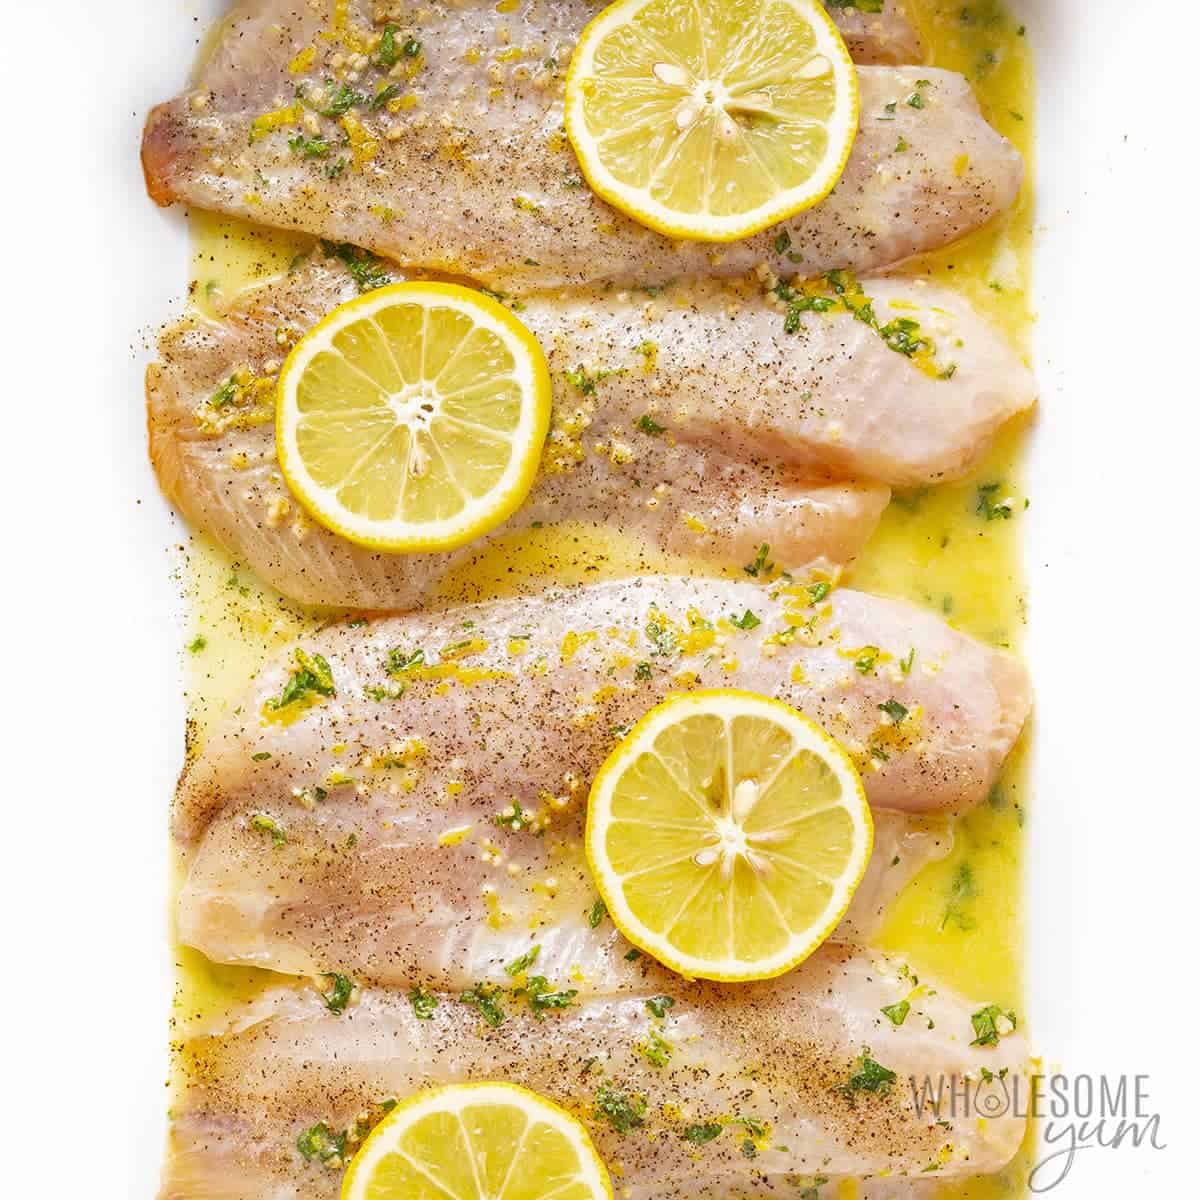 Raw tilapia with lemon butter sauce and lemon slices, before baking.